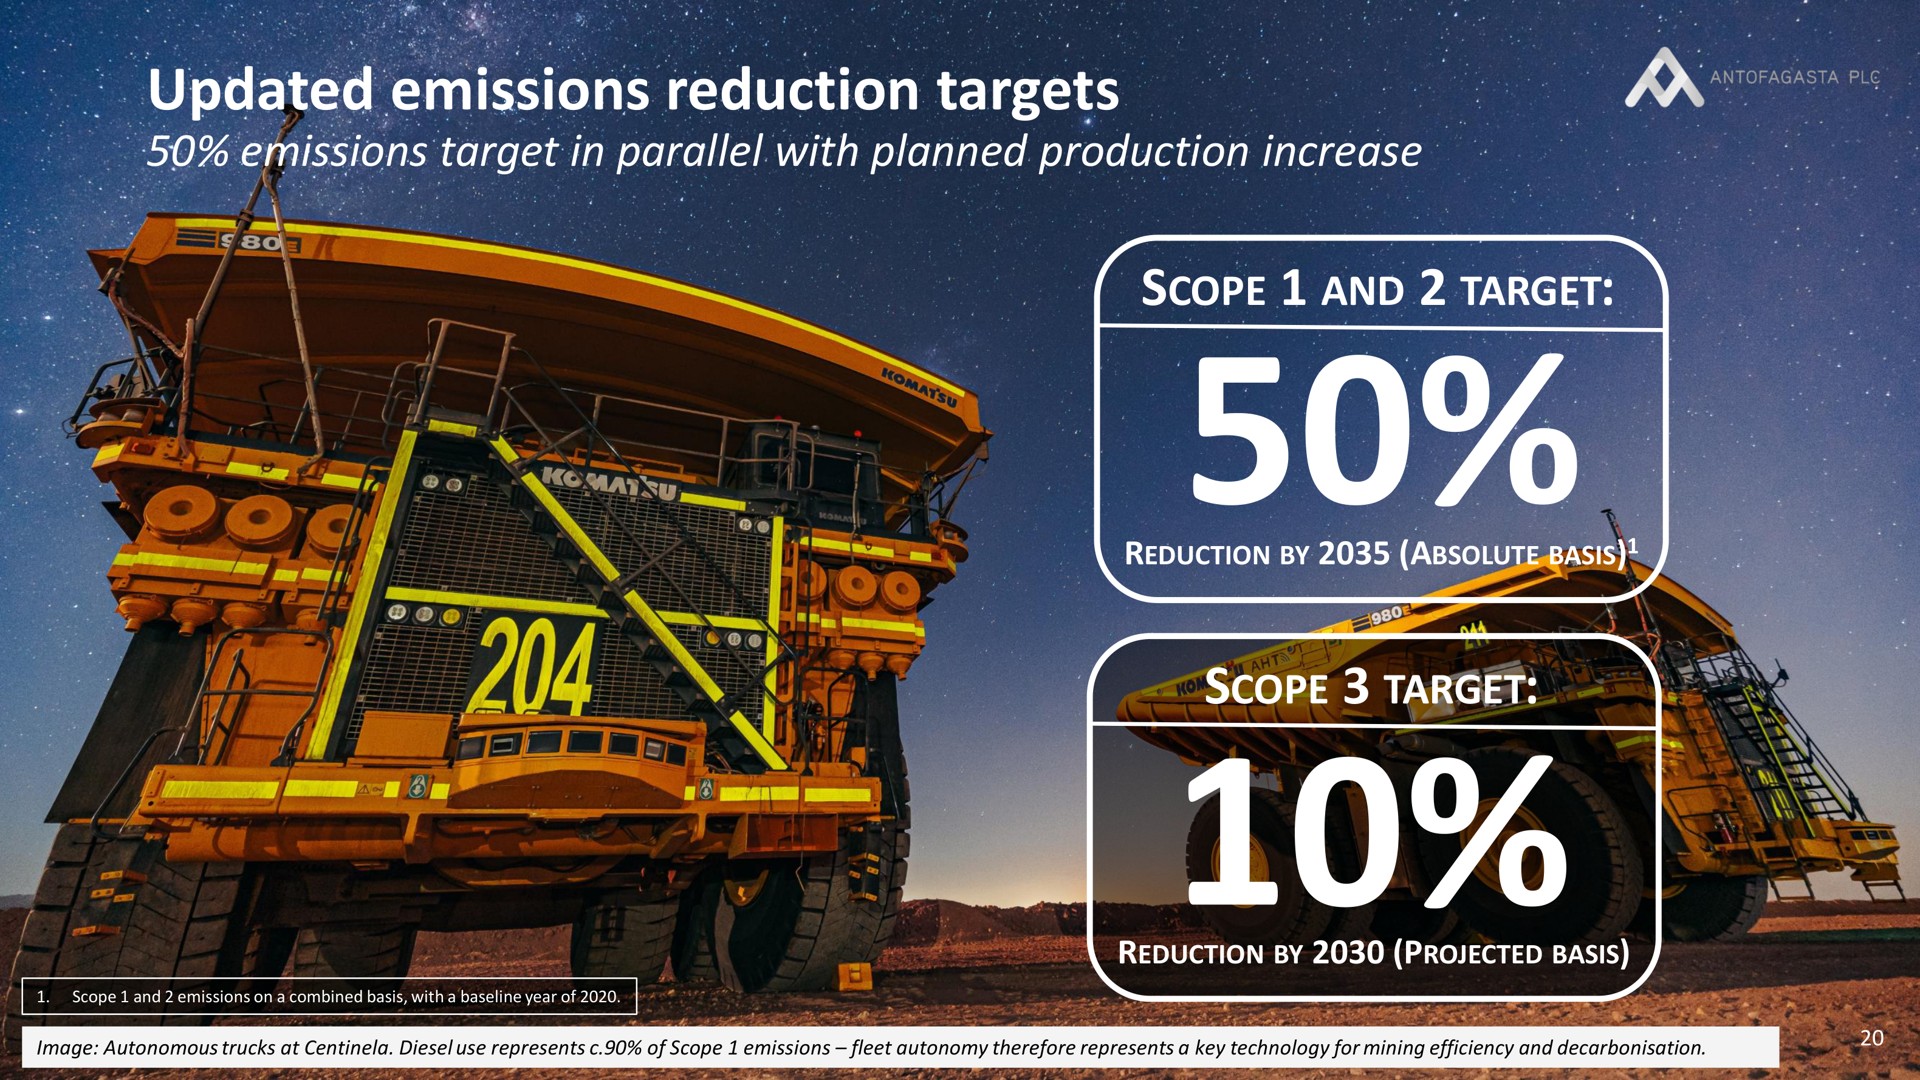 updated emissions reduction targets a a ere teste target a tate production increase a a eel van a scope target seen | Antofagasta